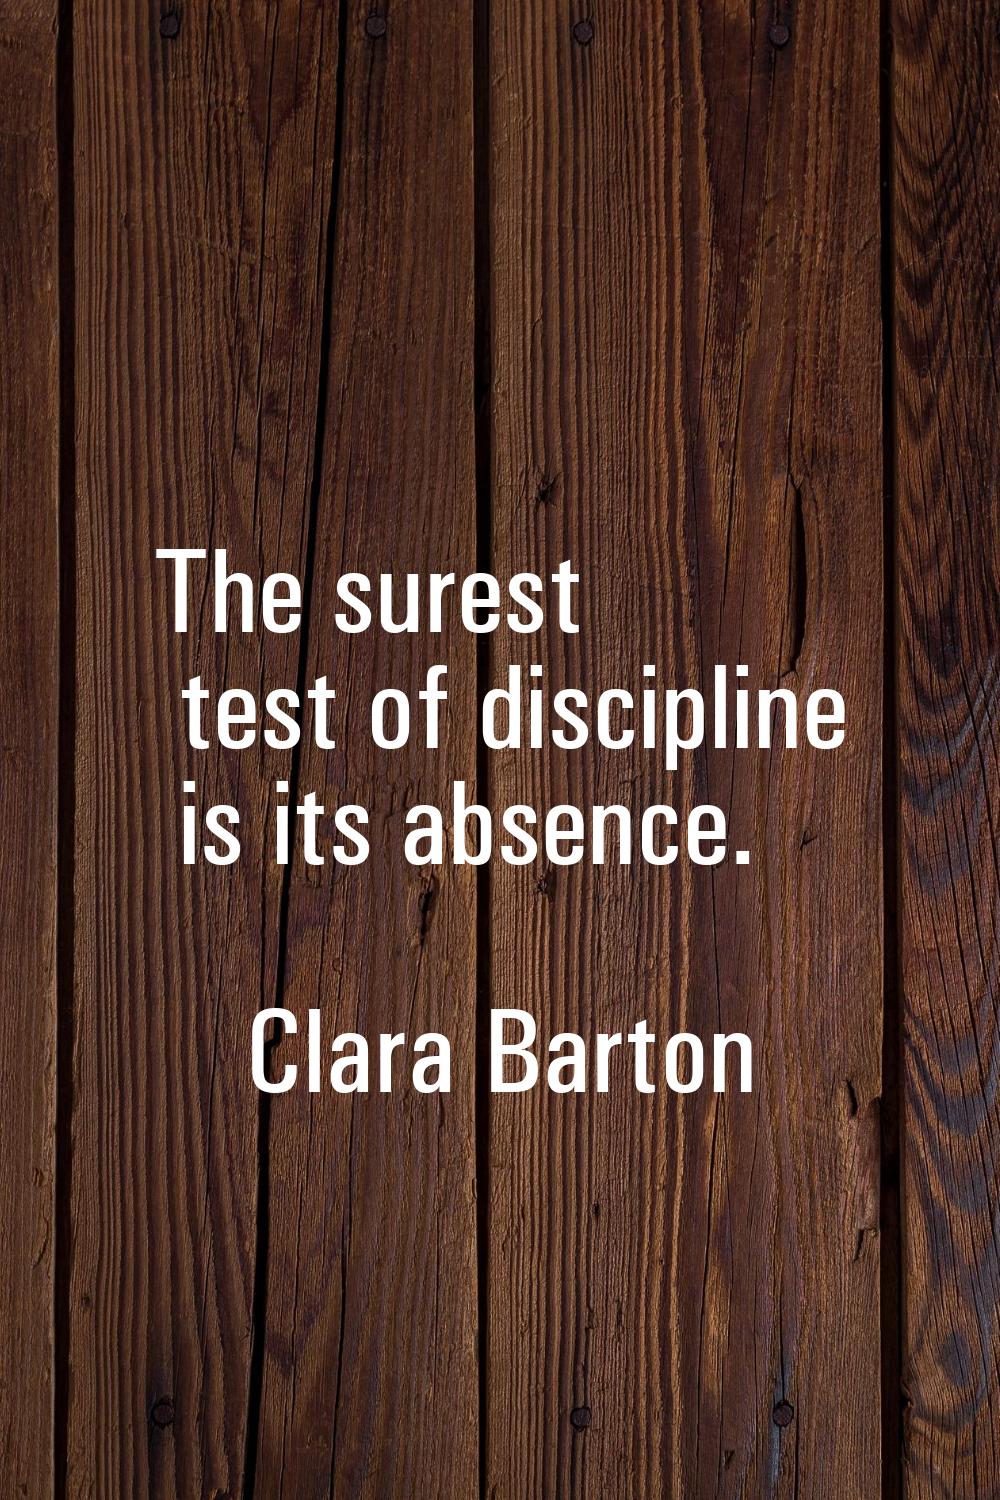 The surest test of discipline is its absence.